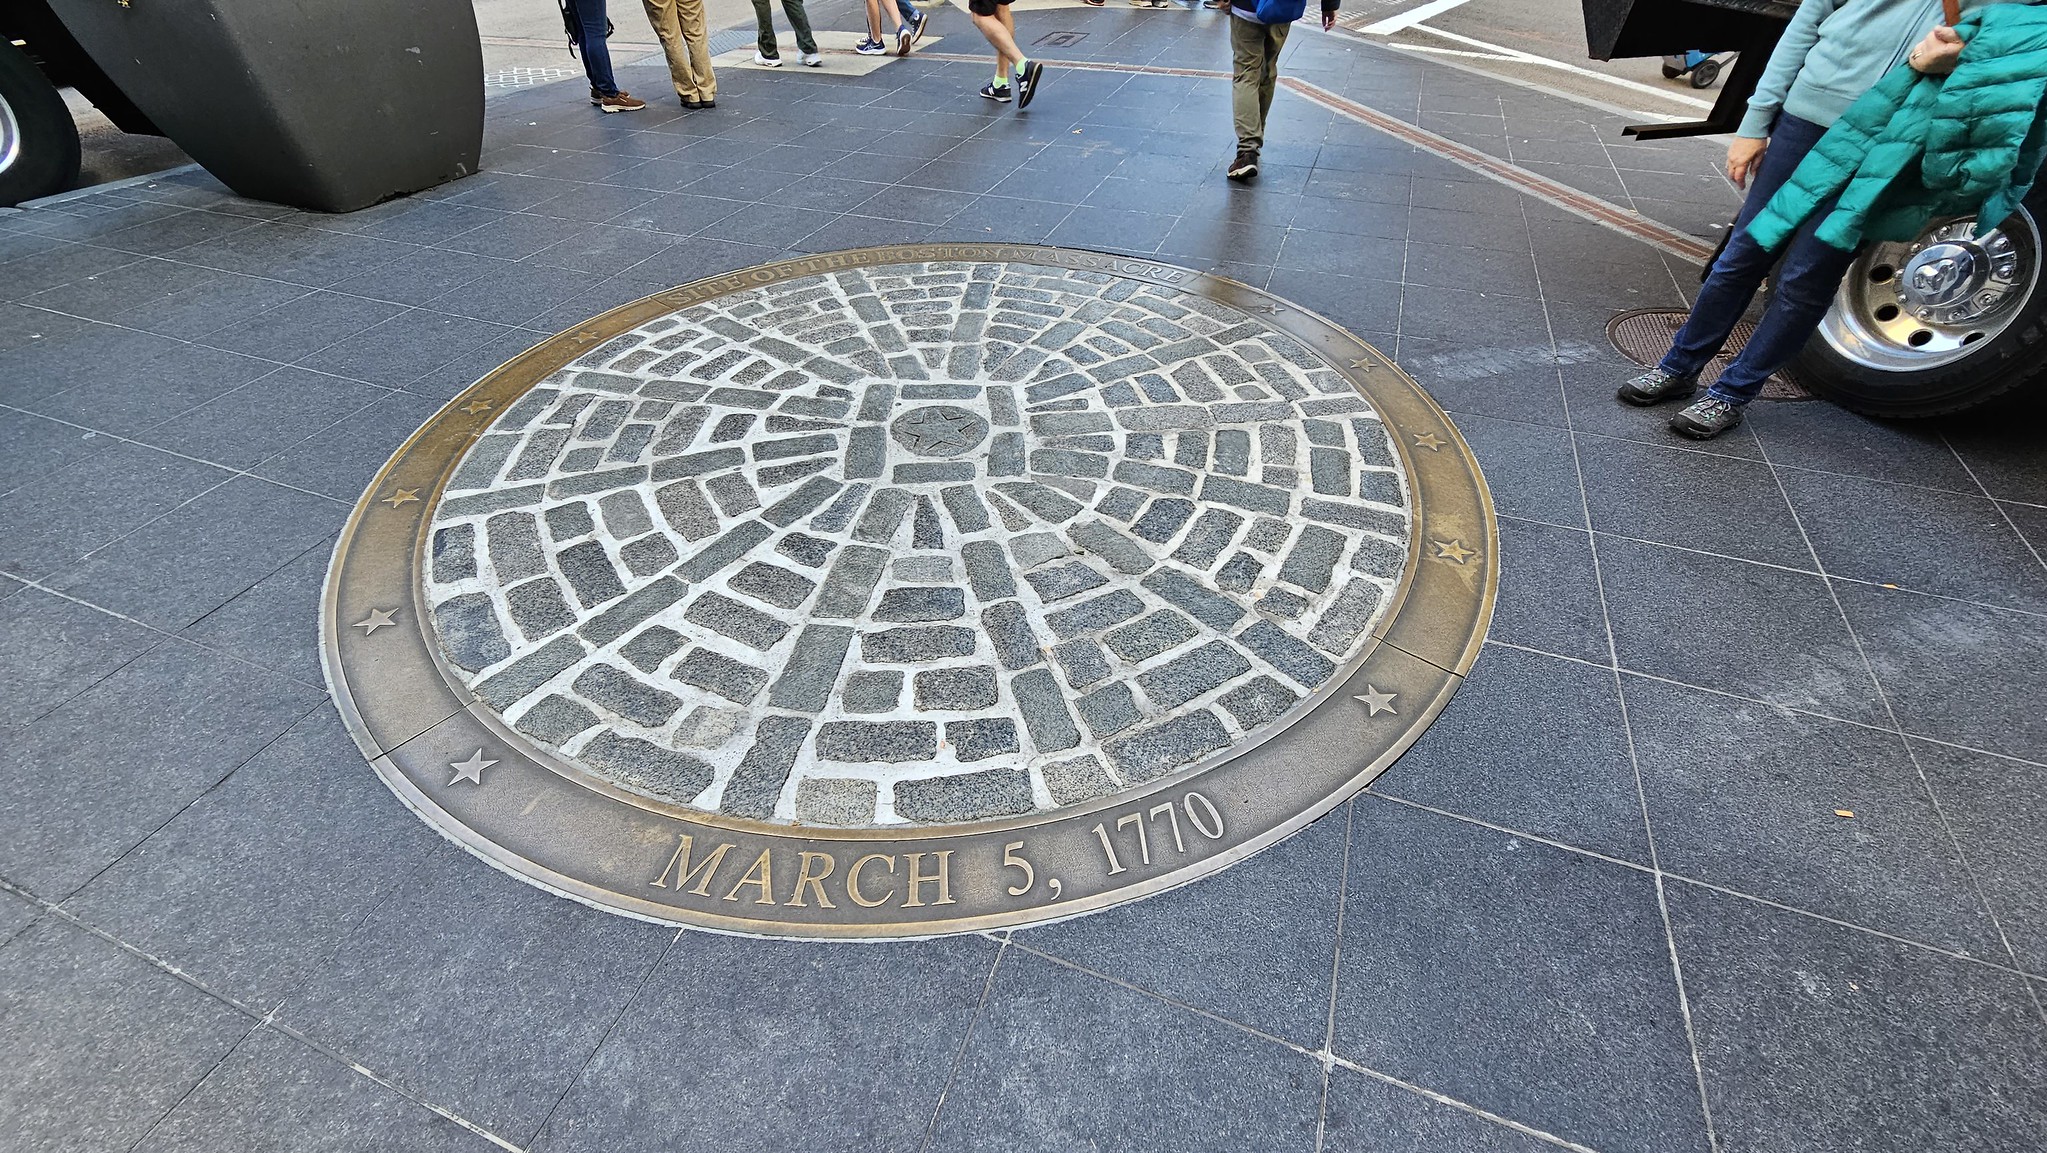 The round disc apparently signifies the site of the Boston massacre